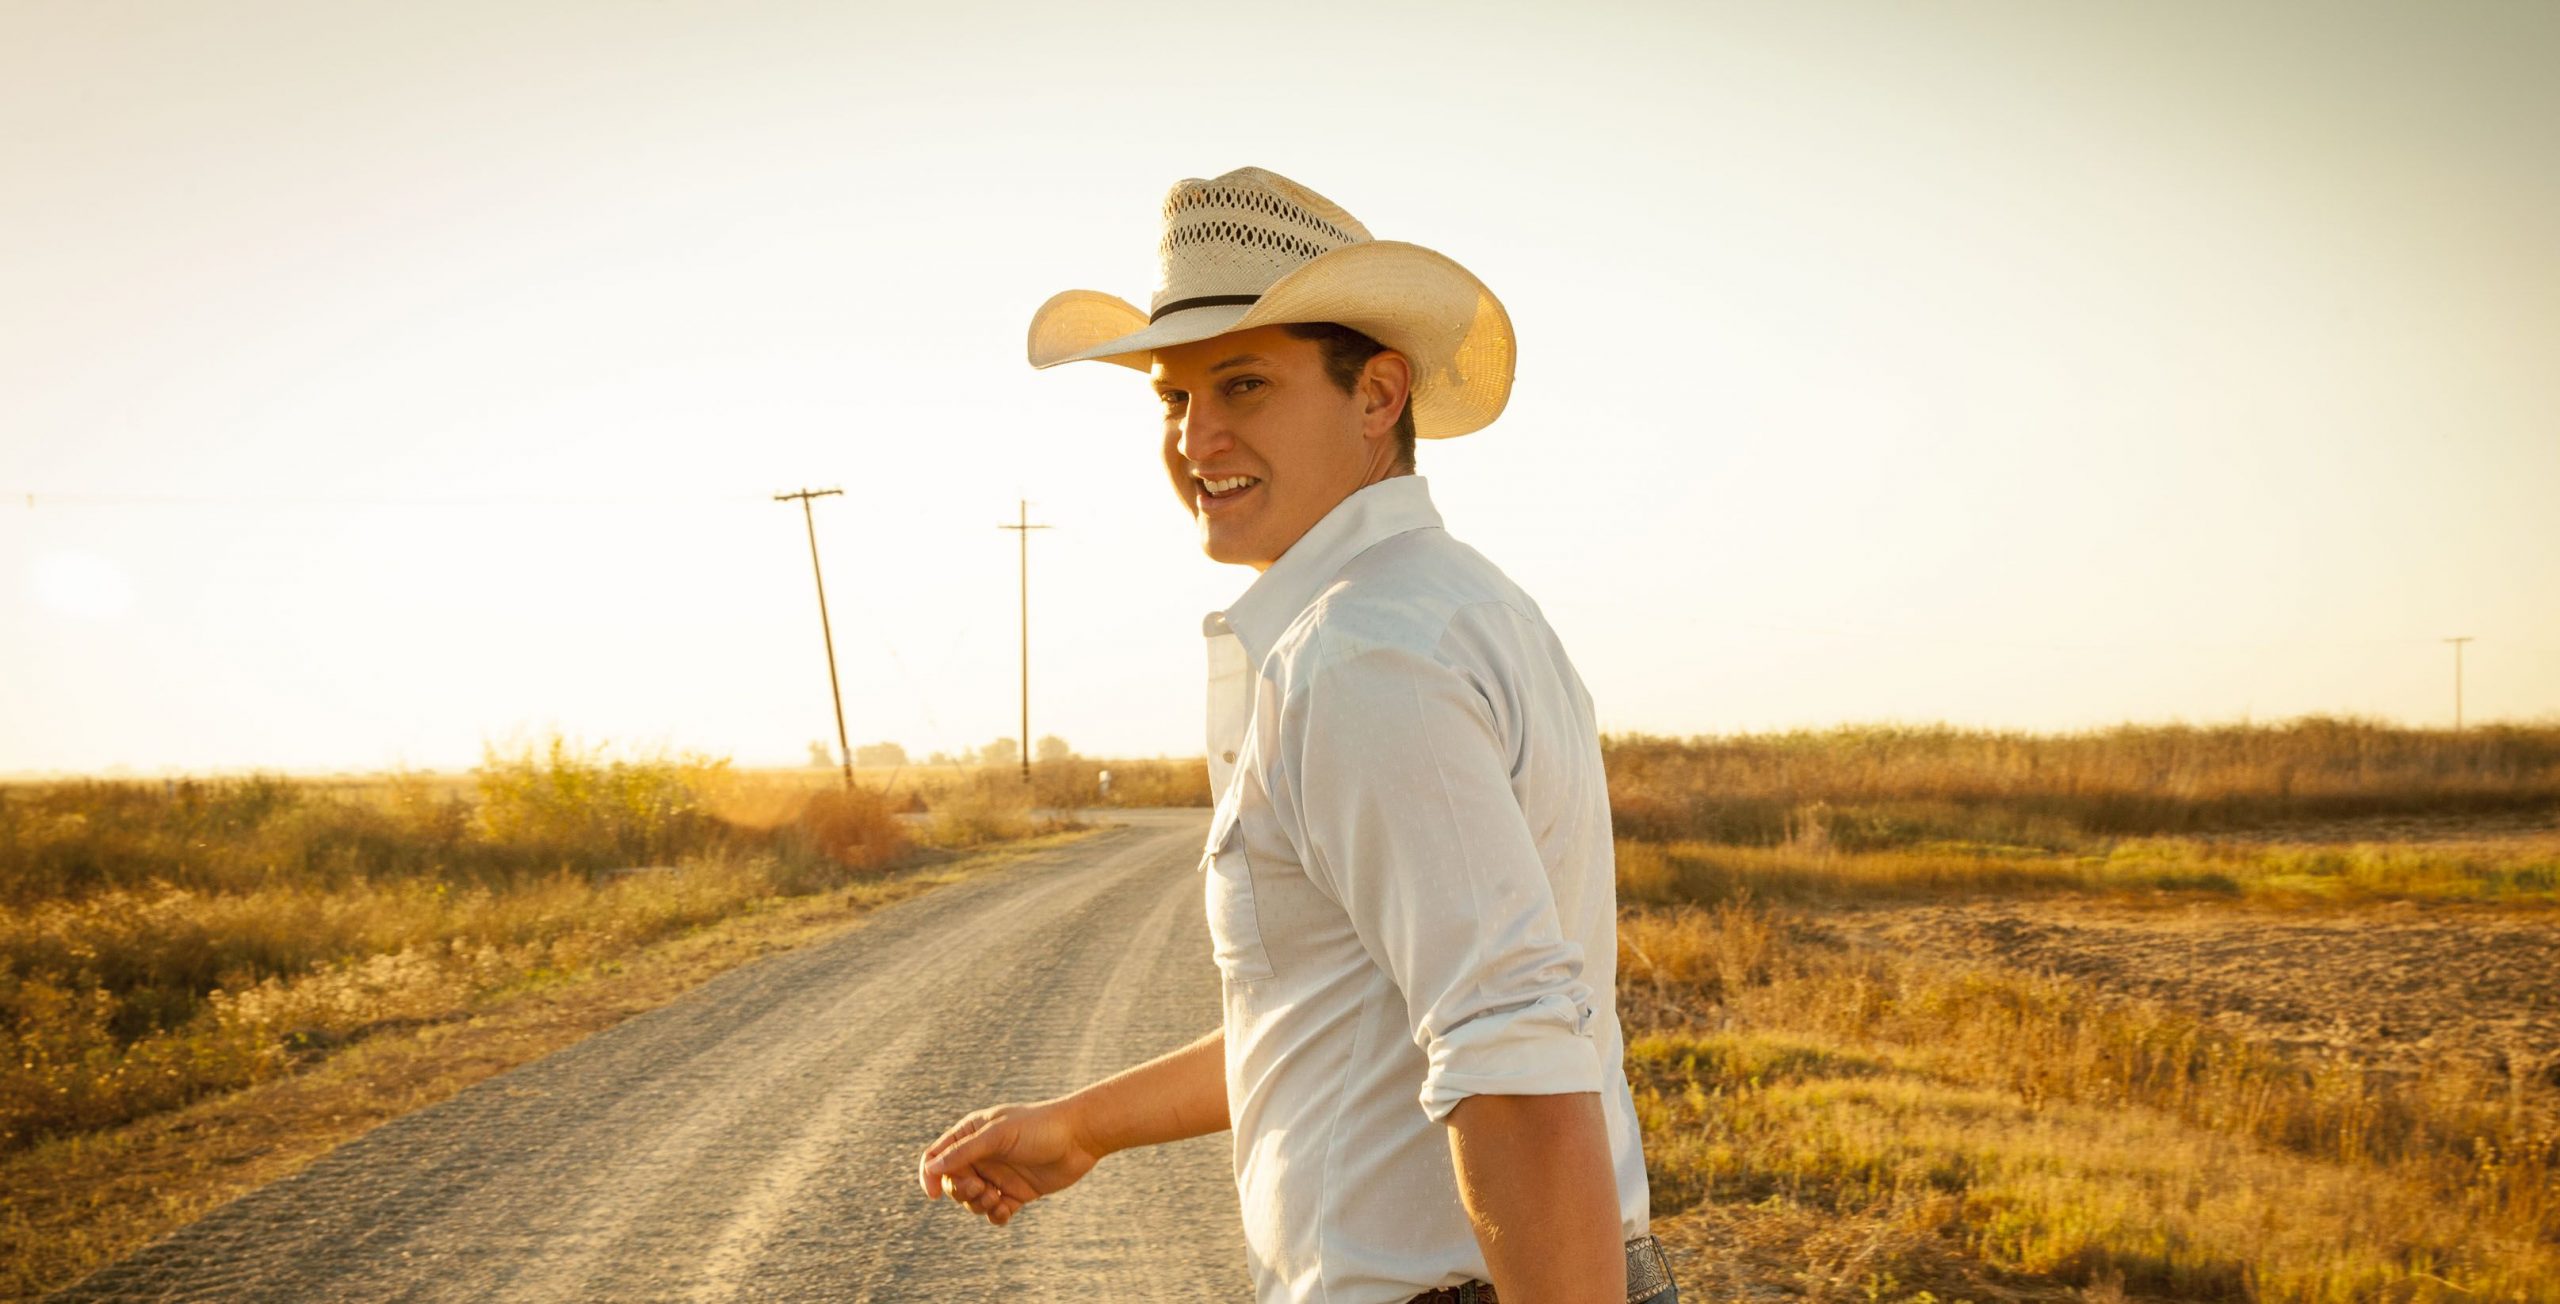 JON PARDI SCORES SECOND No. 1 WITH “DIRT ON MY BOOTS”